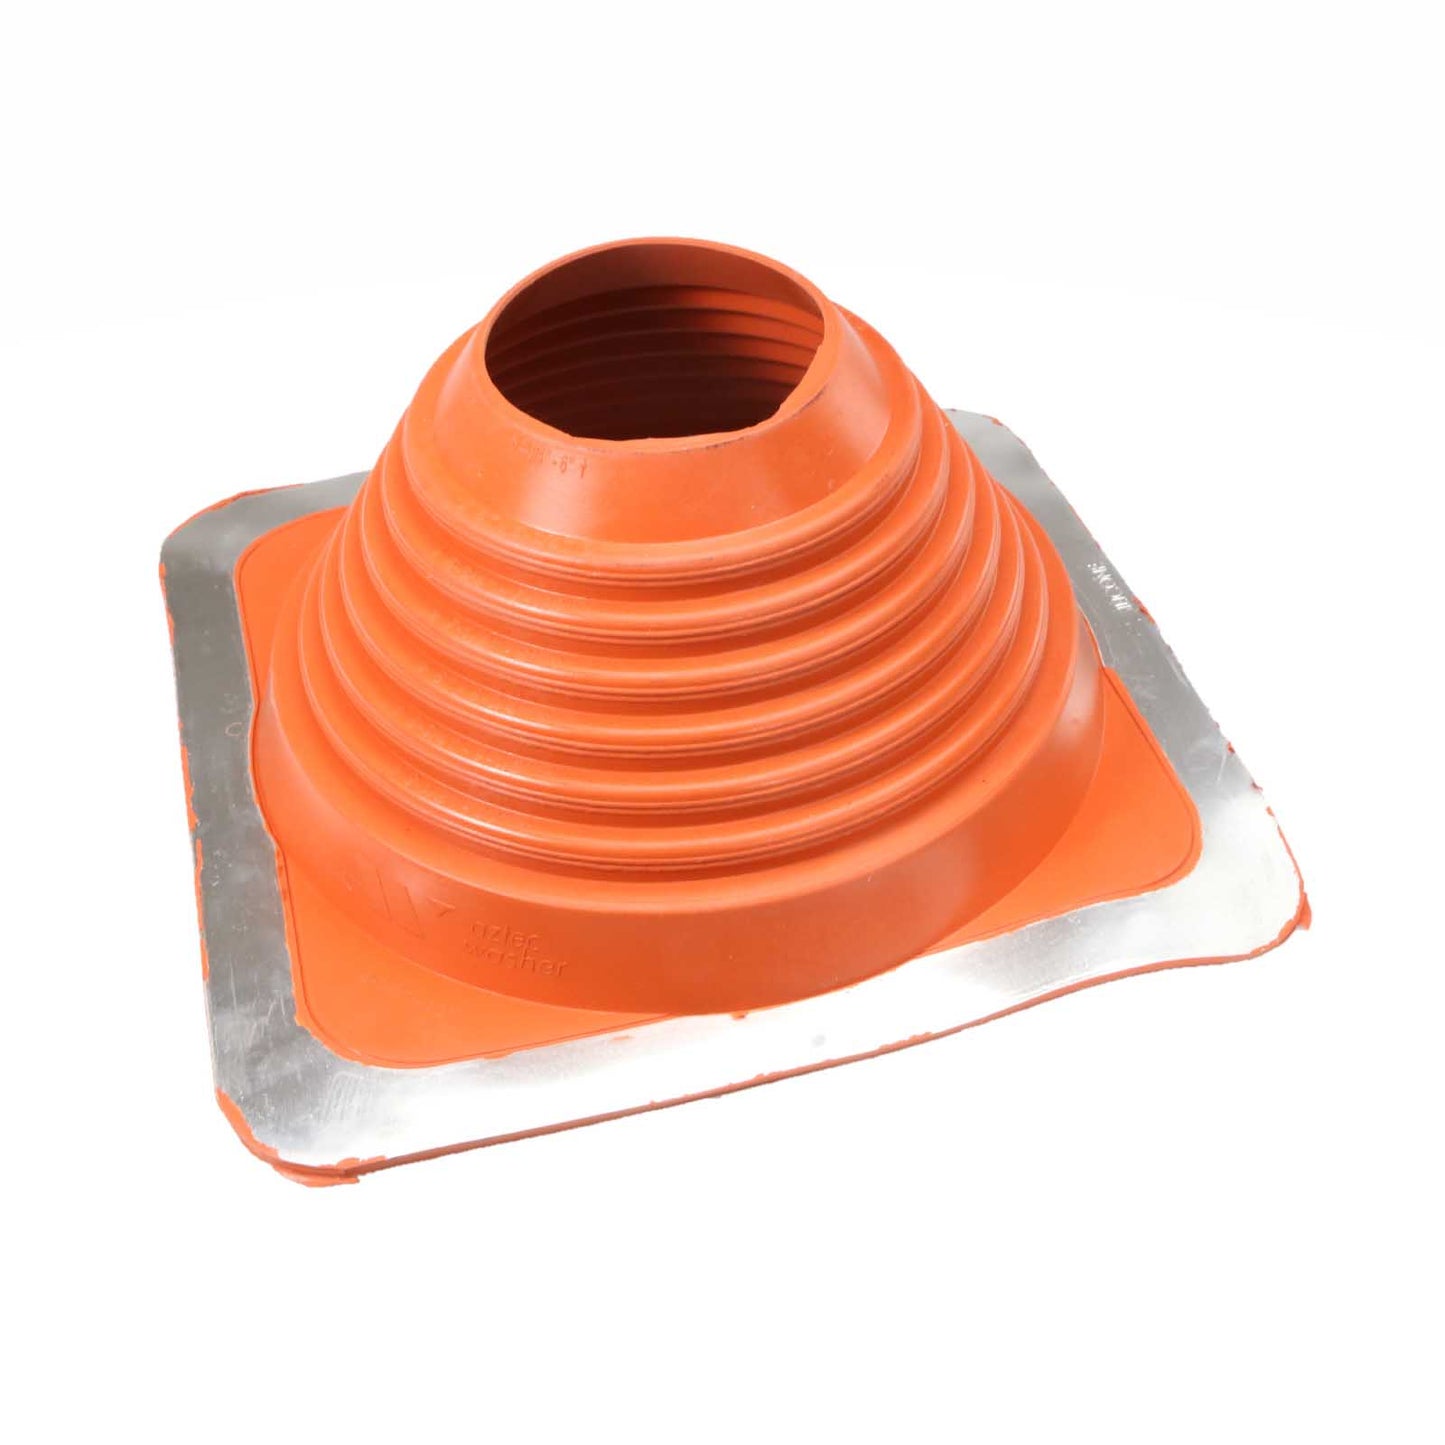 #6 Roofjack Square Silicone Pipe Flashing Boot Red